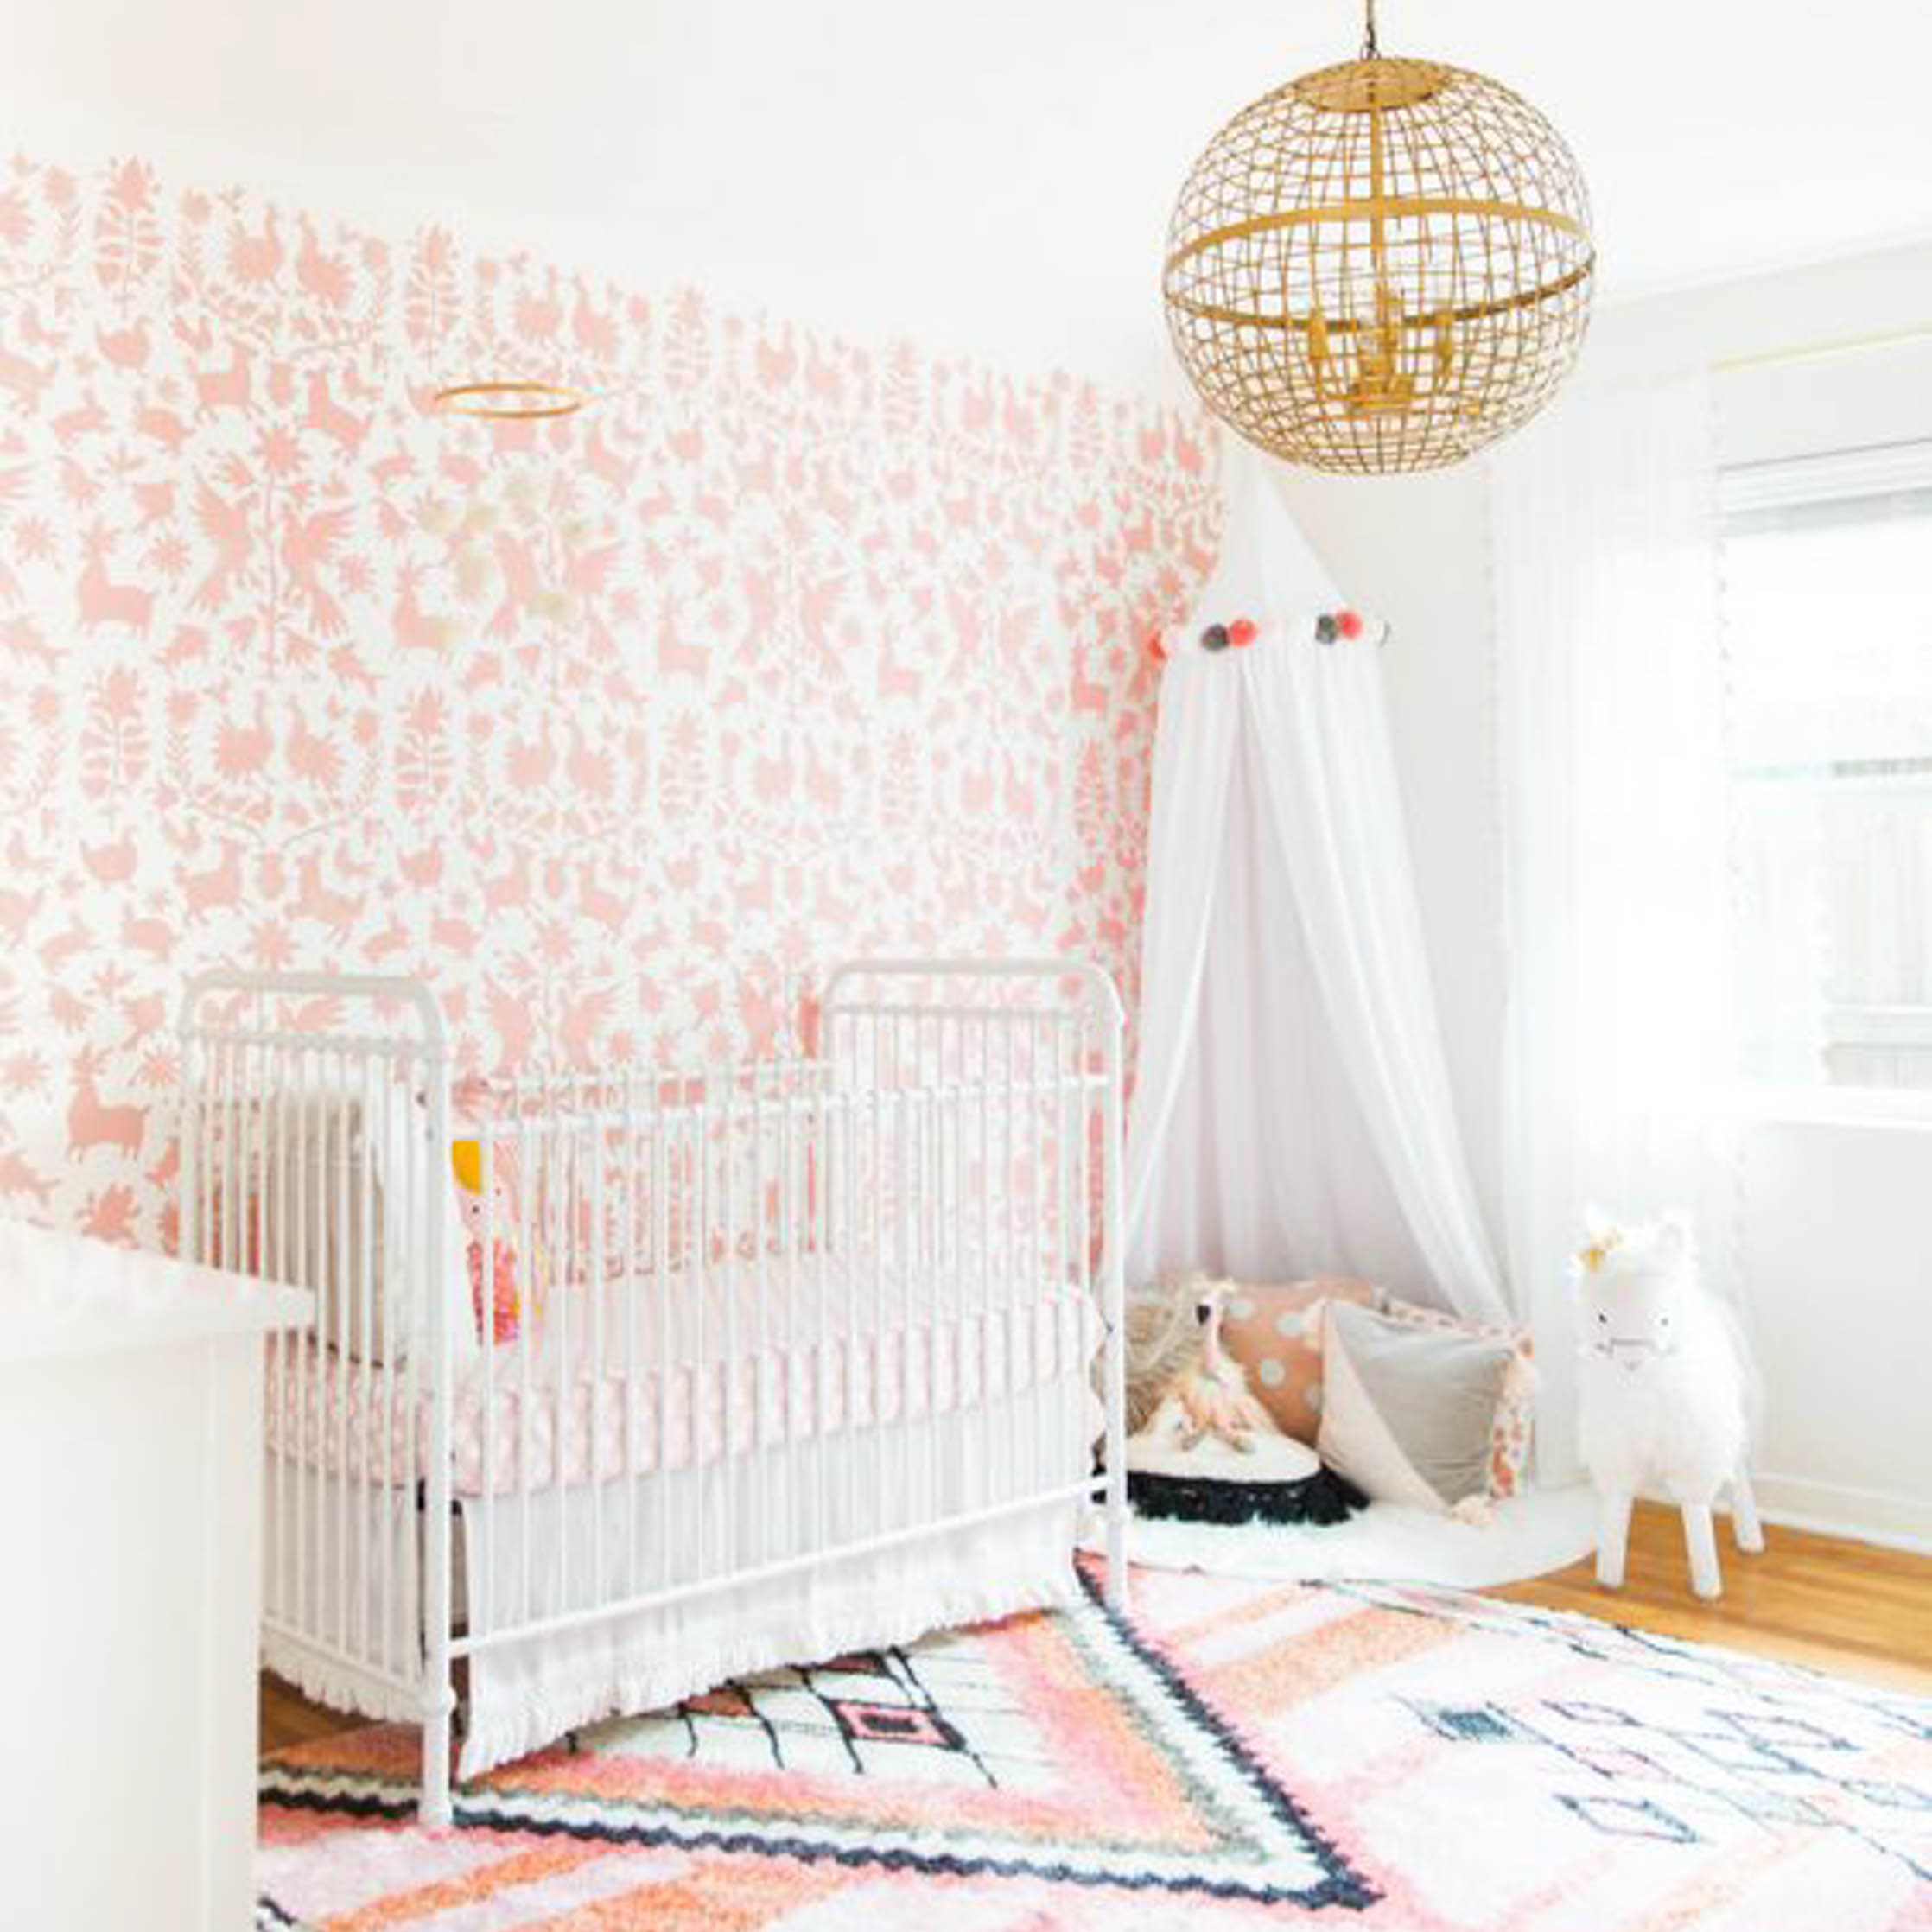 Pinterest - In the Nursery with Cake and Confetti